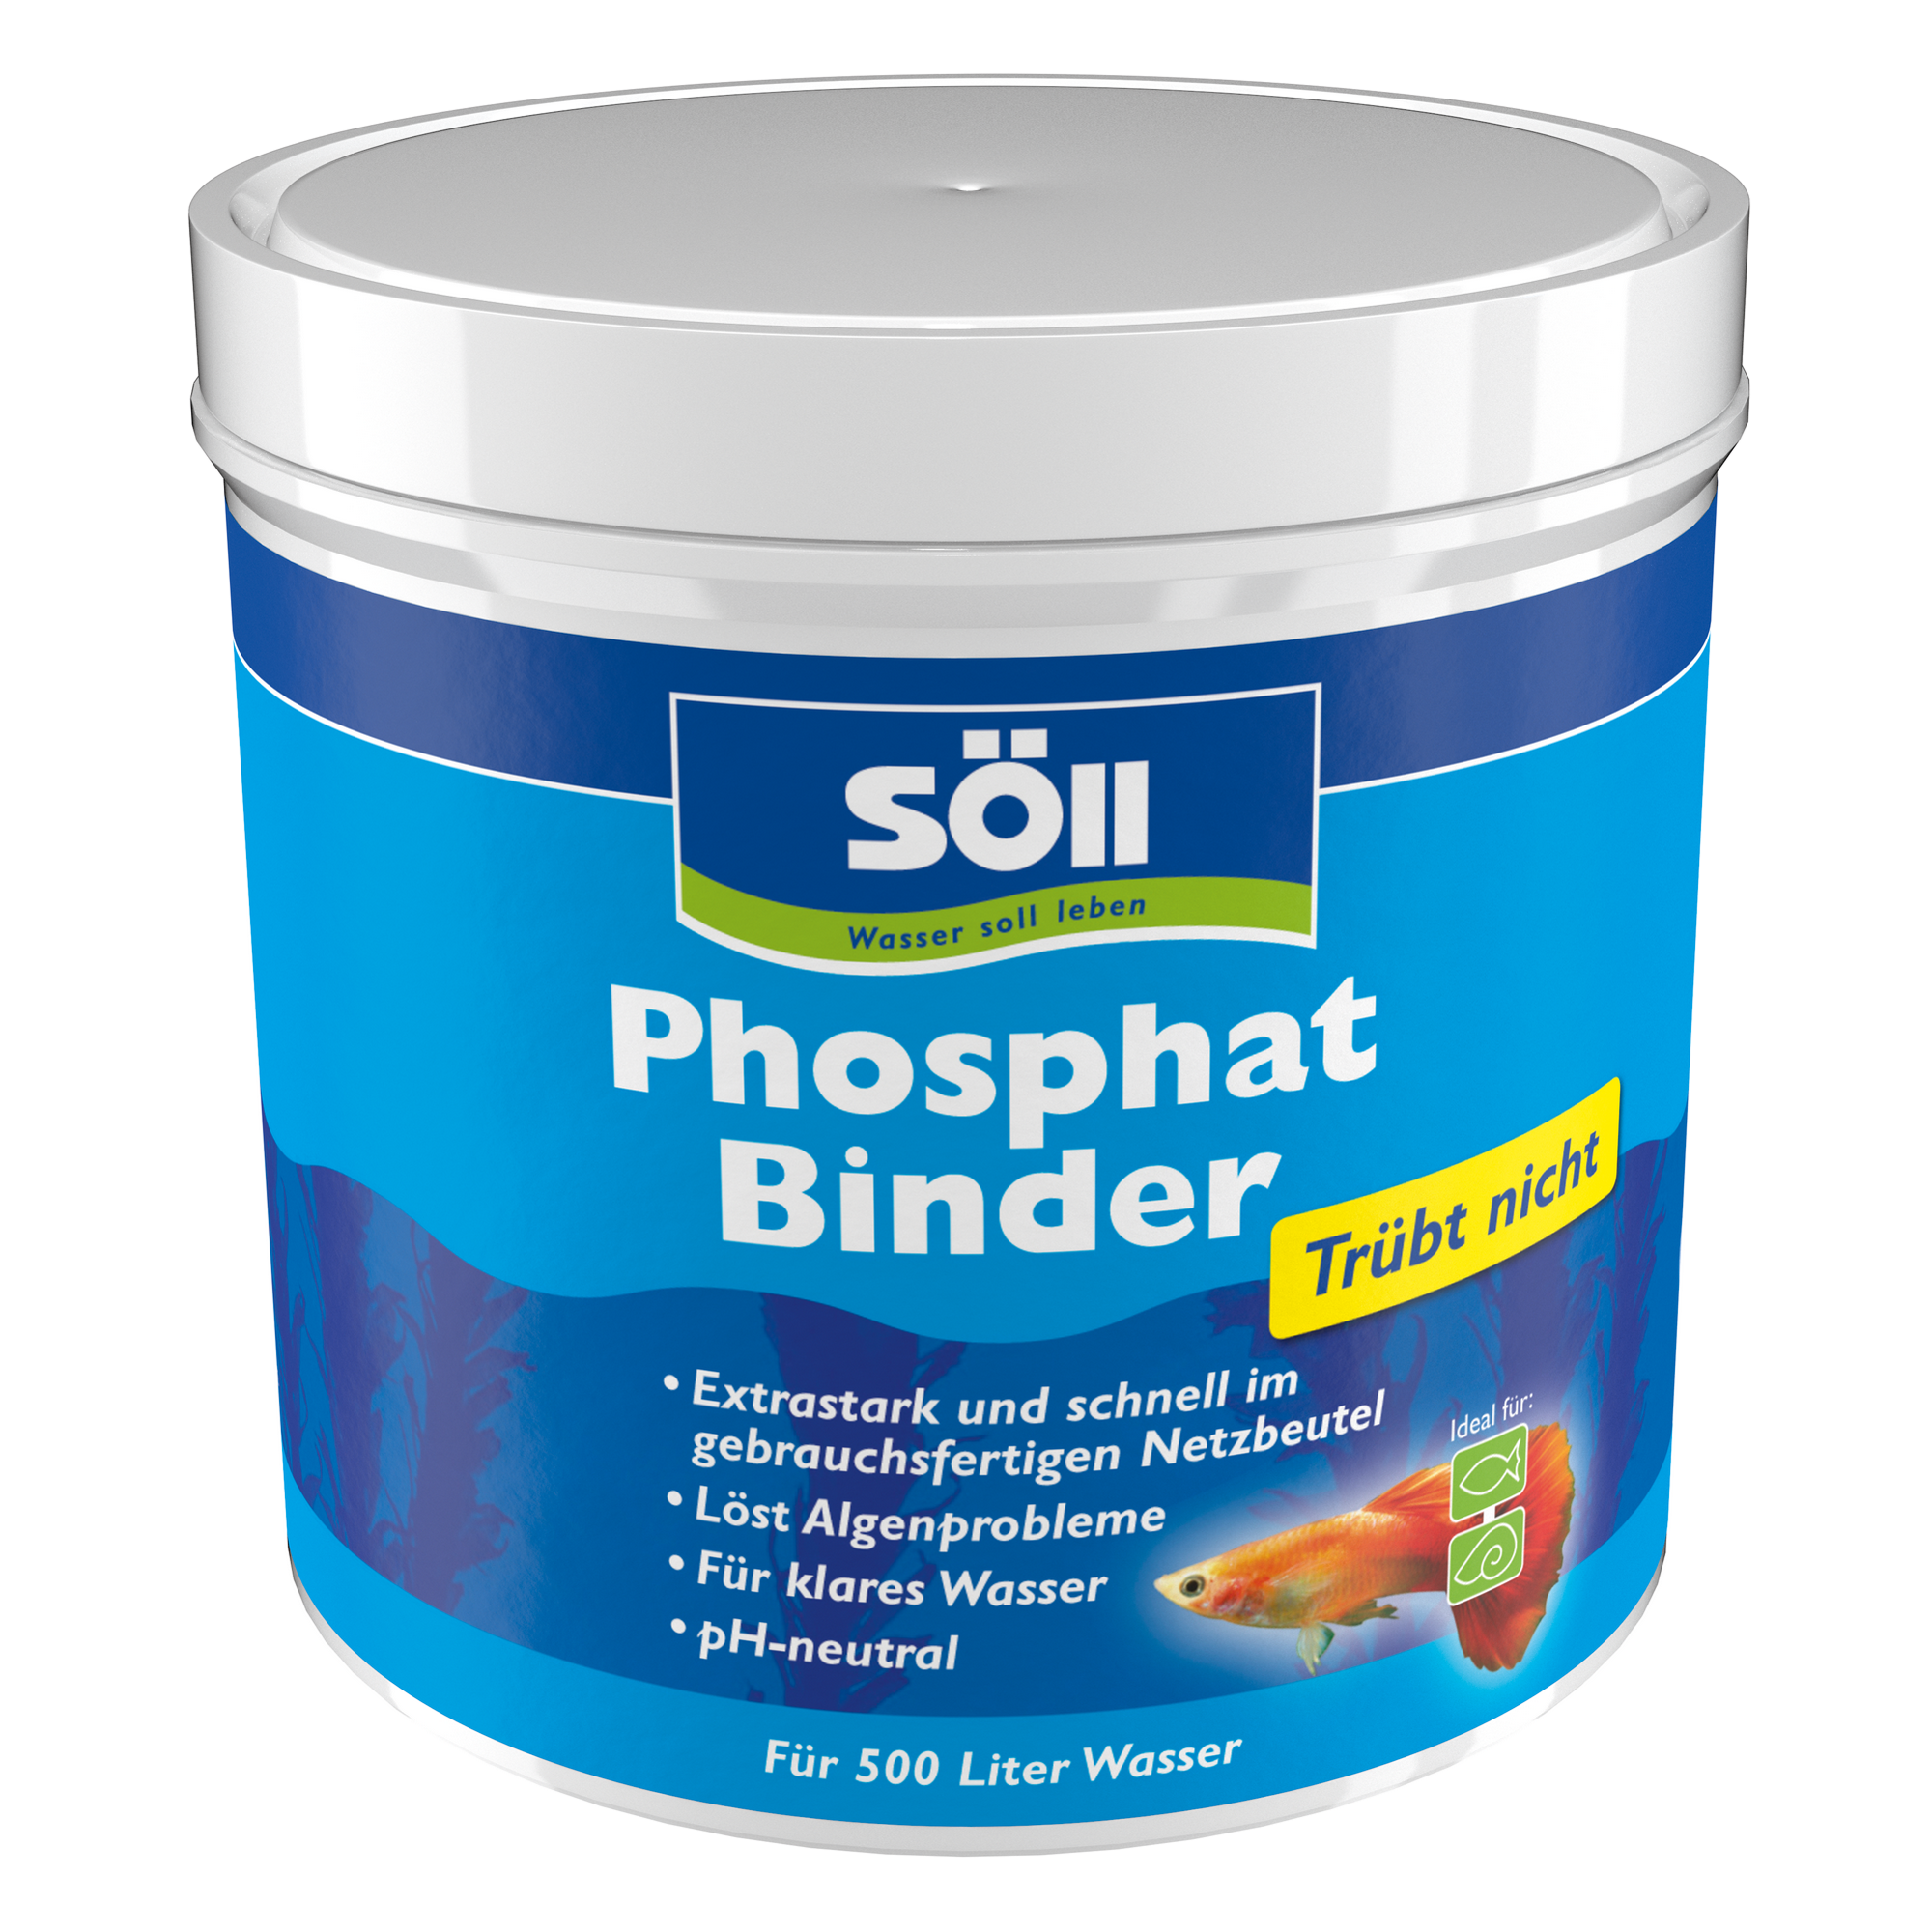 Phosphat Binder 300 g + product picture